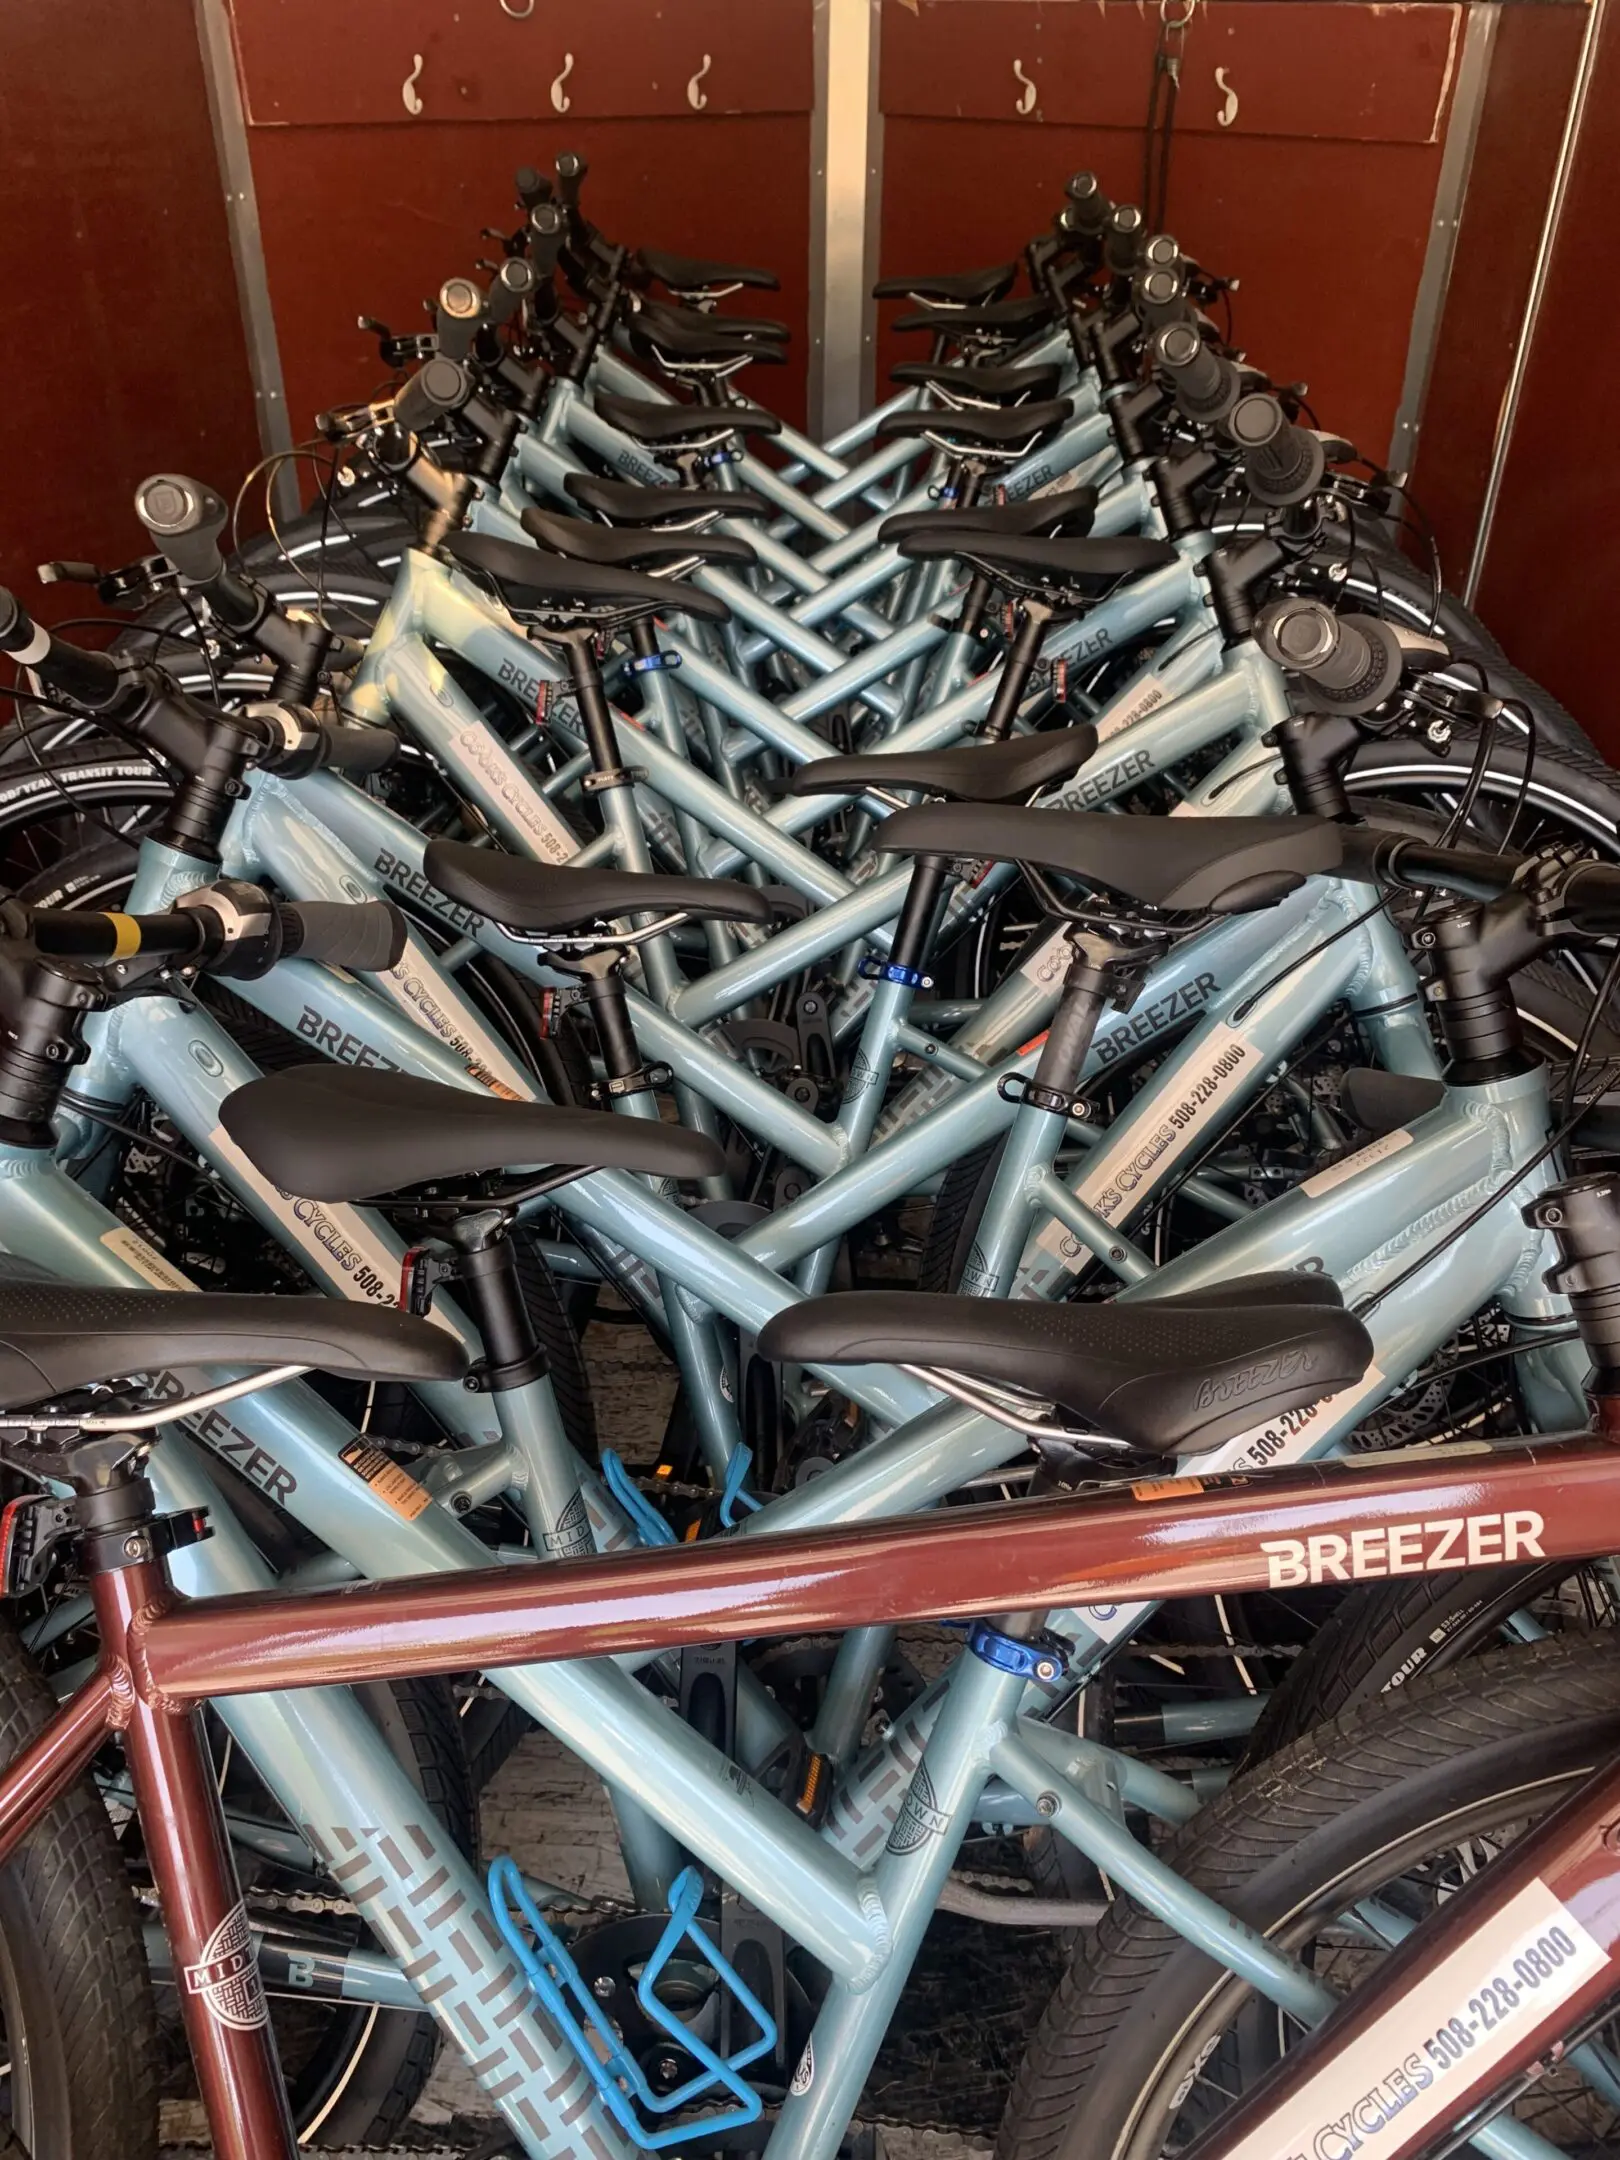 A large group of bicycles in a room.